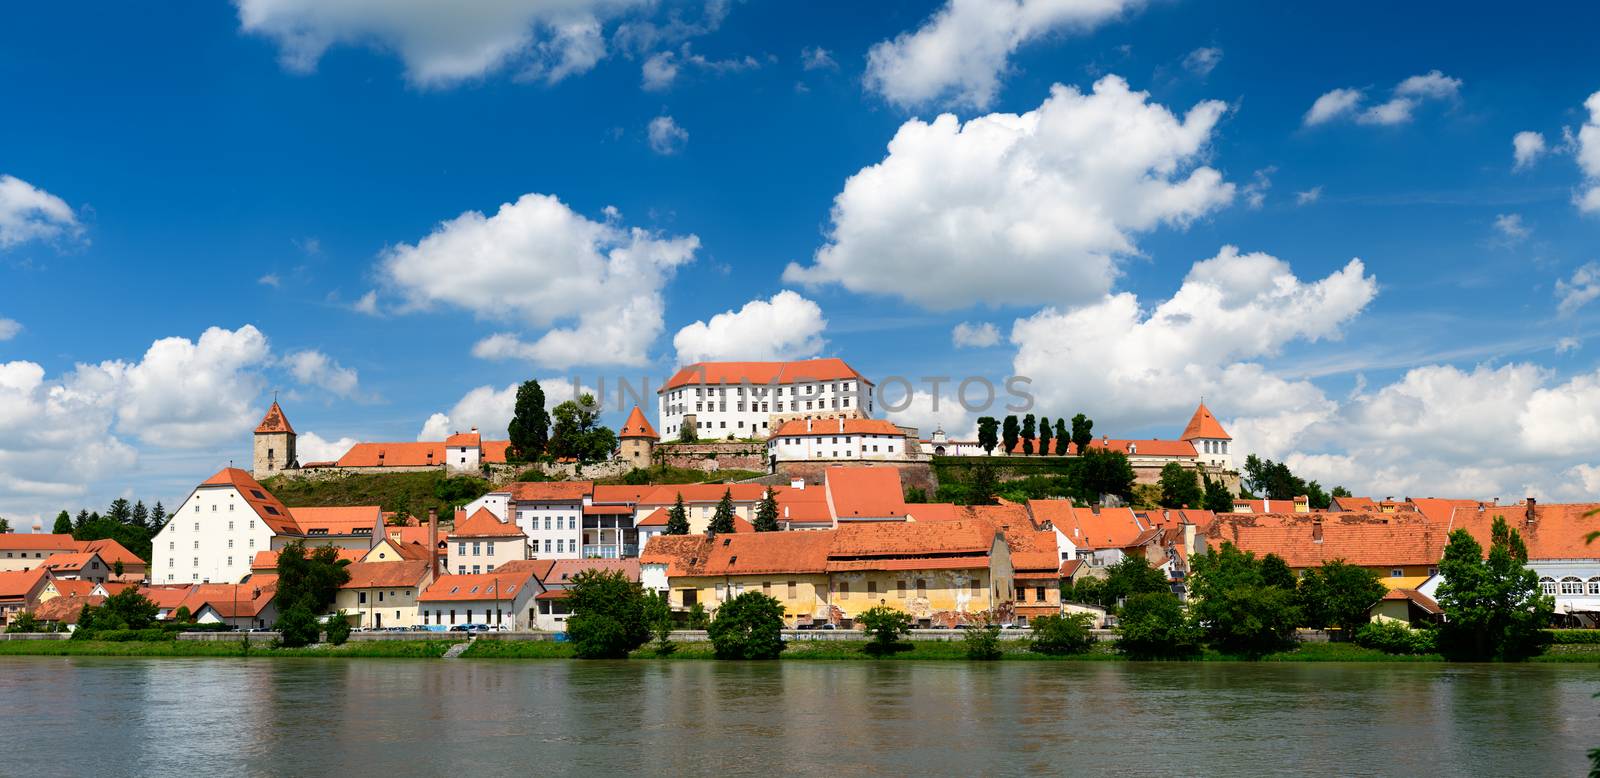 Ptuj, Slovenia, panoramic shot of oldest city in Slovenia with a castle overlooking the old town from a hill and the Drava river beneath, clouds moving across the sky time lapse